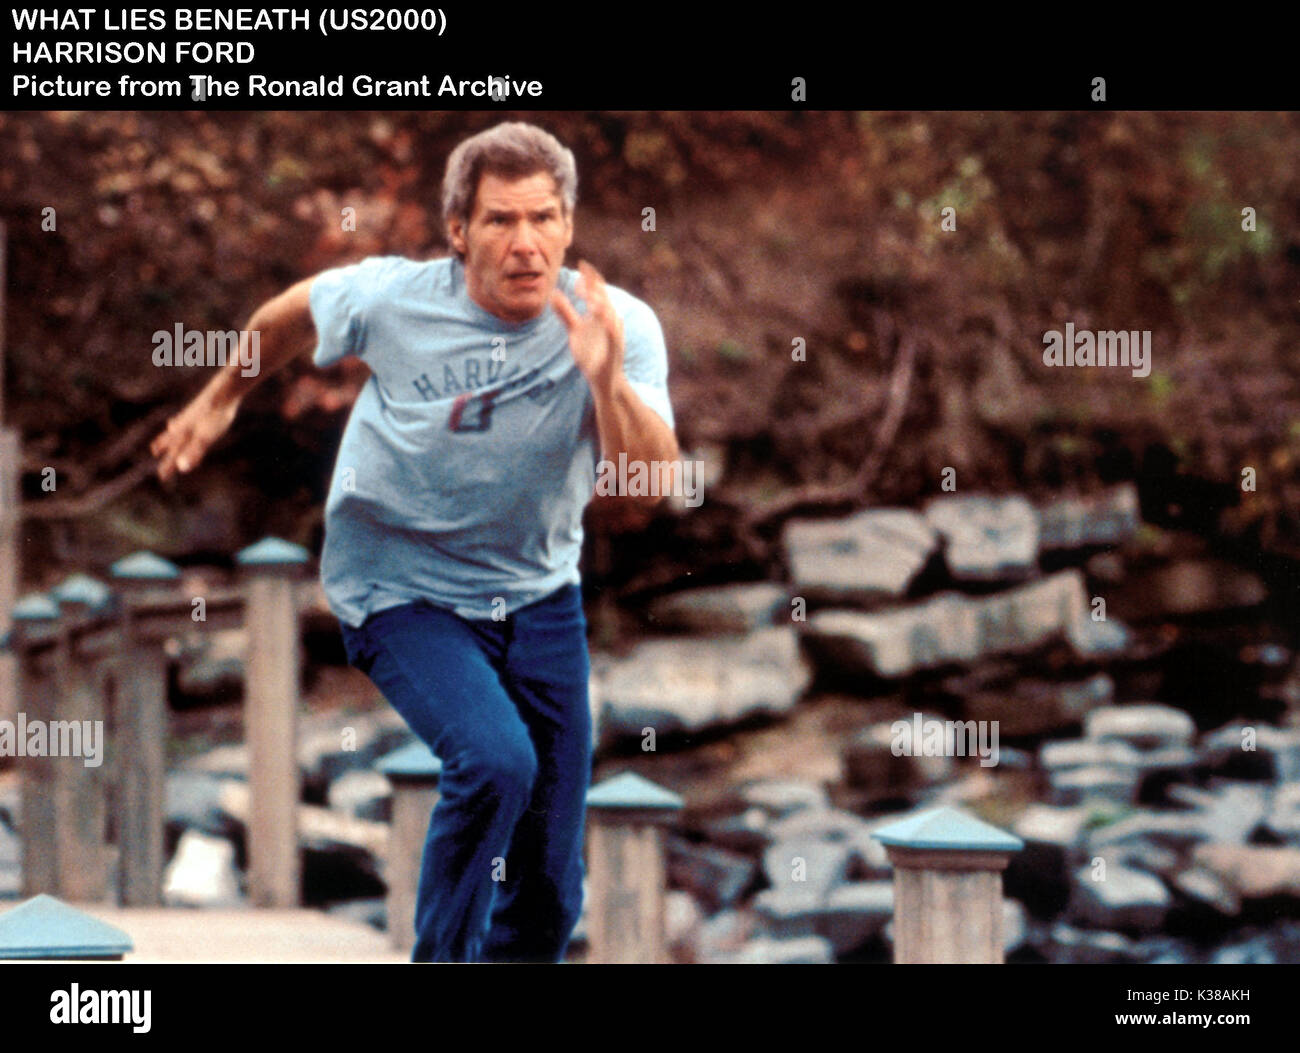 WHAT LIES BENEATH HARRISON FORD     Date: 2000 Stock Photo